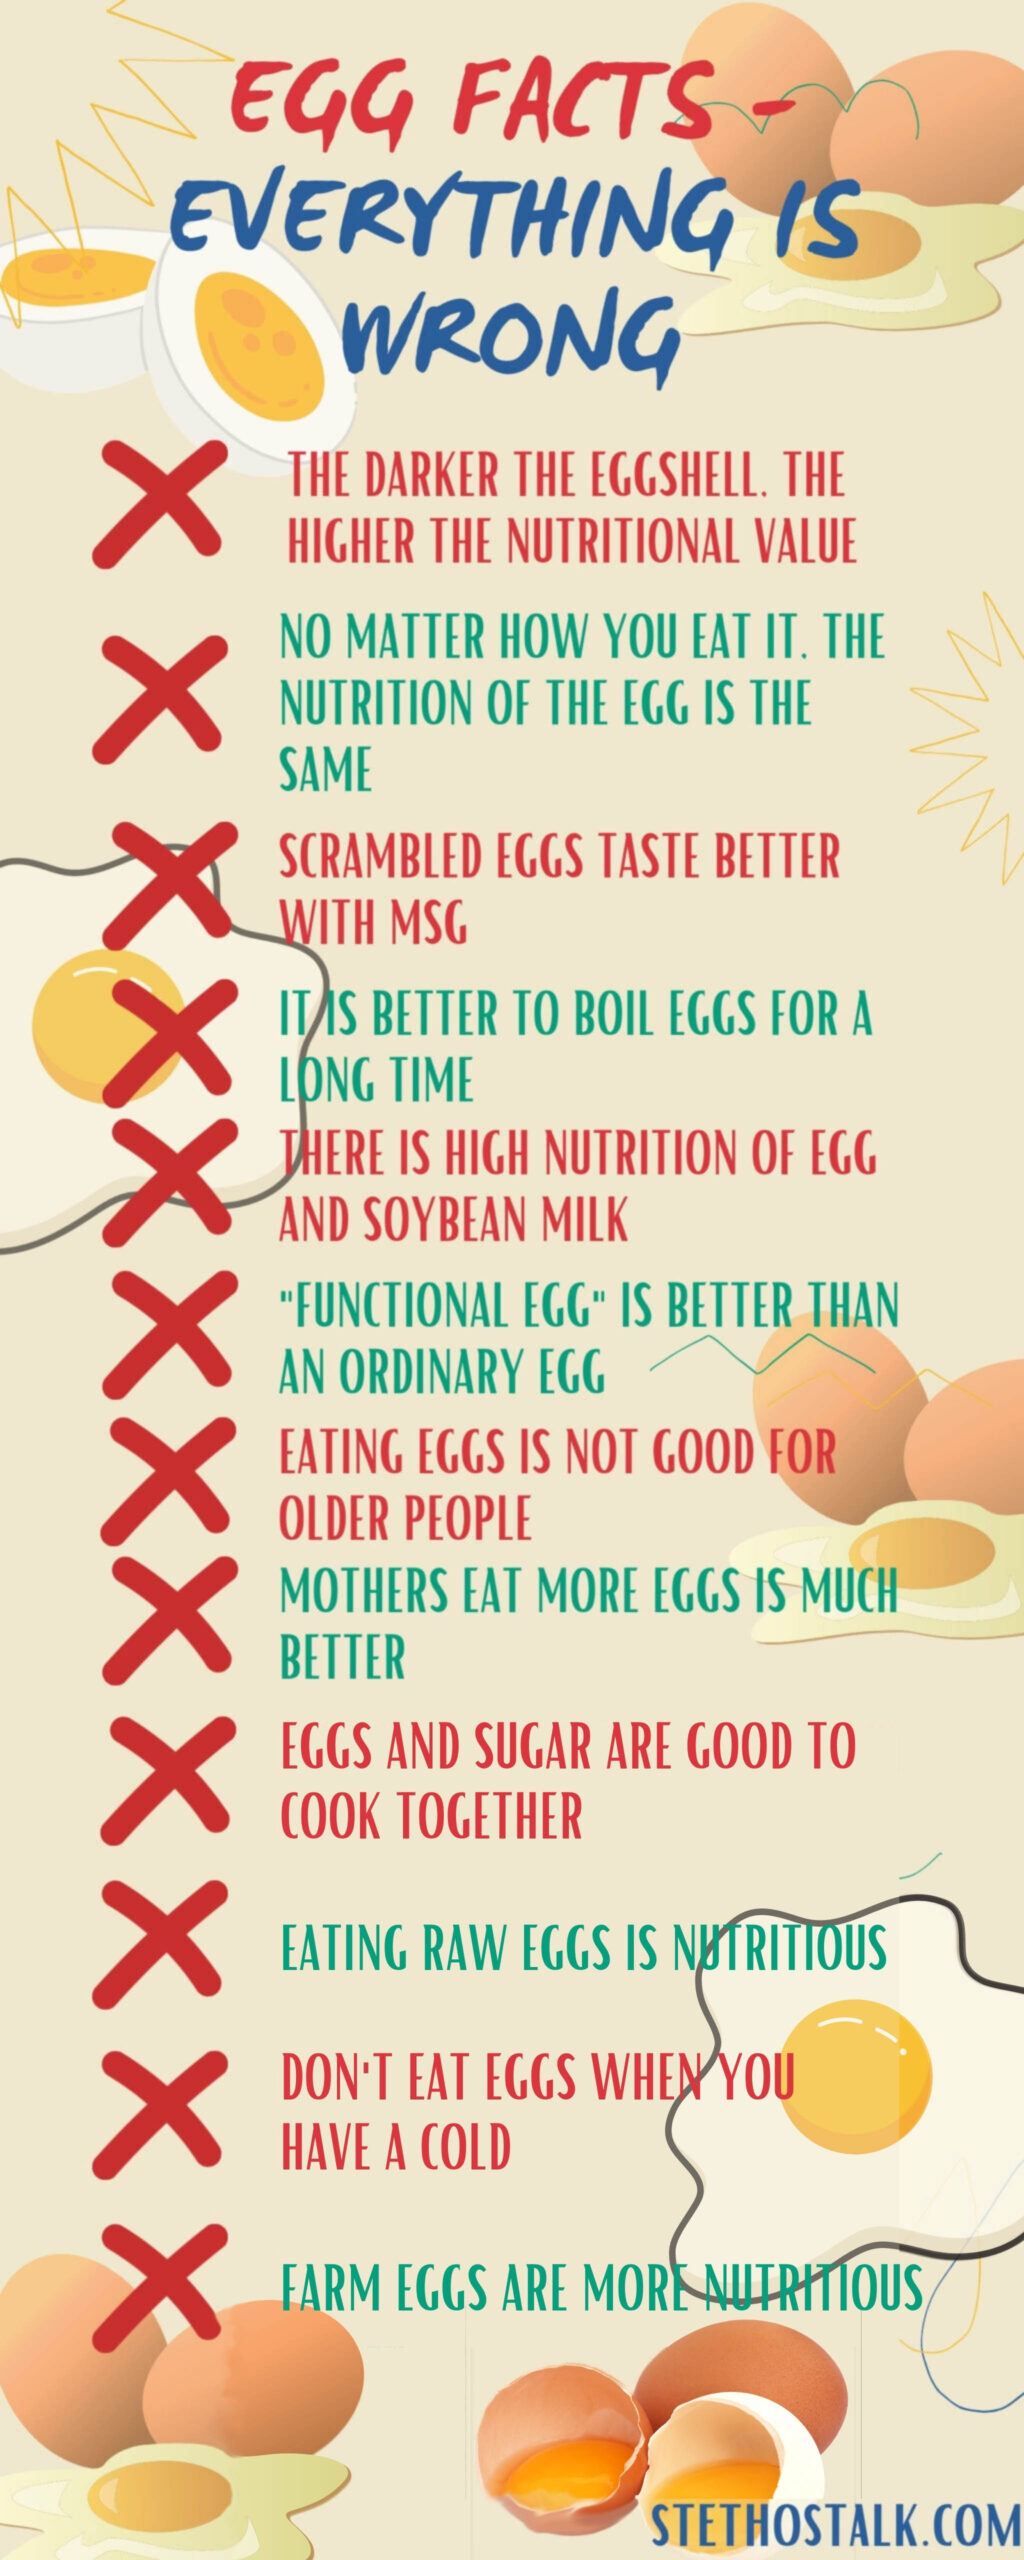 Myths about eating eggs - Infographic